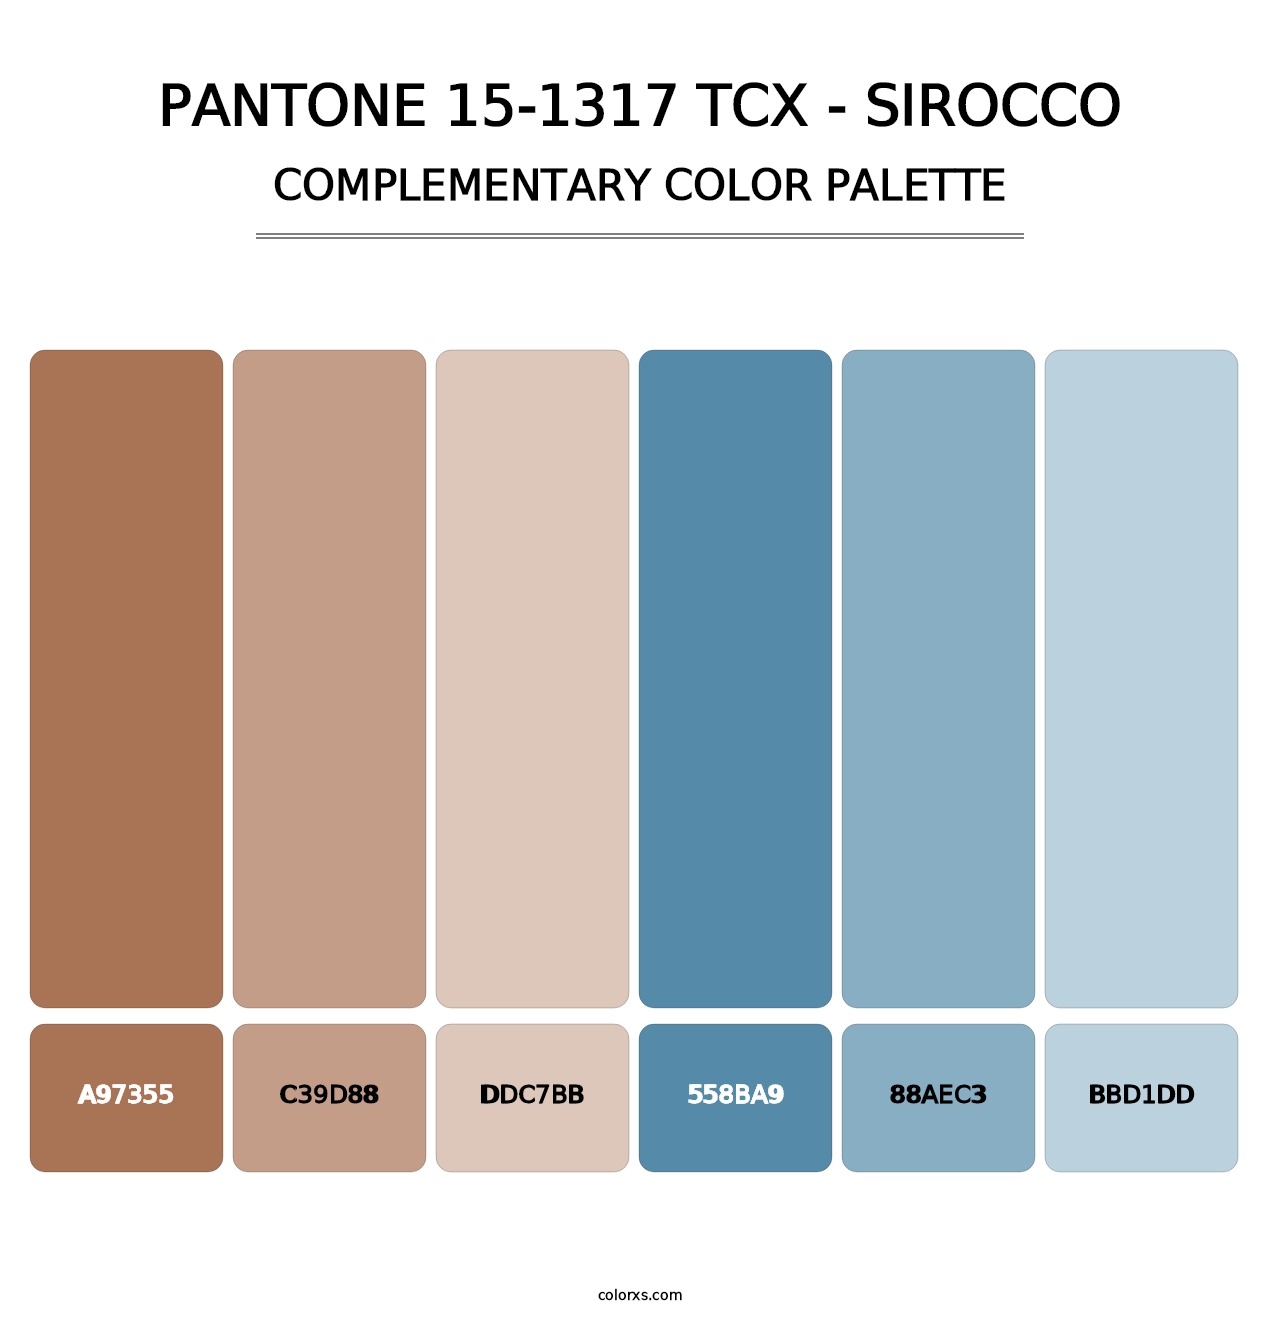 PANTONE 15-1317 TCX - Sirocco - Complementary Color Palette